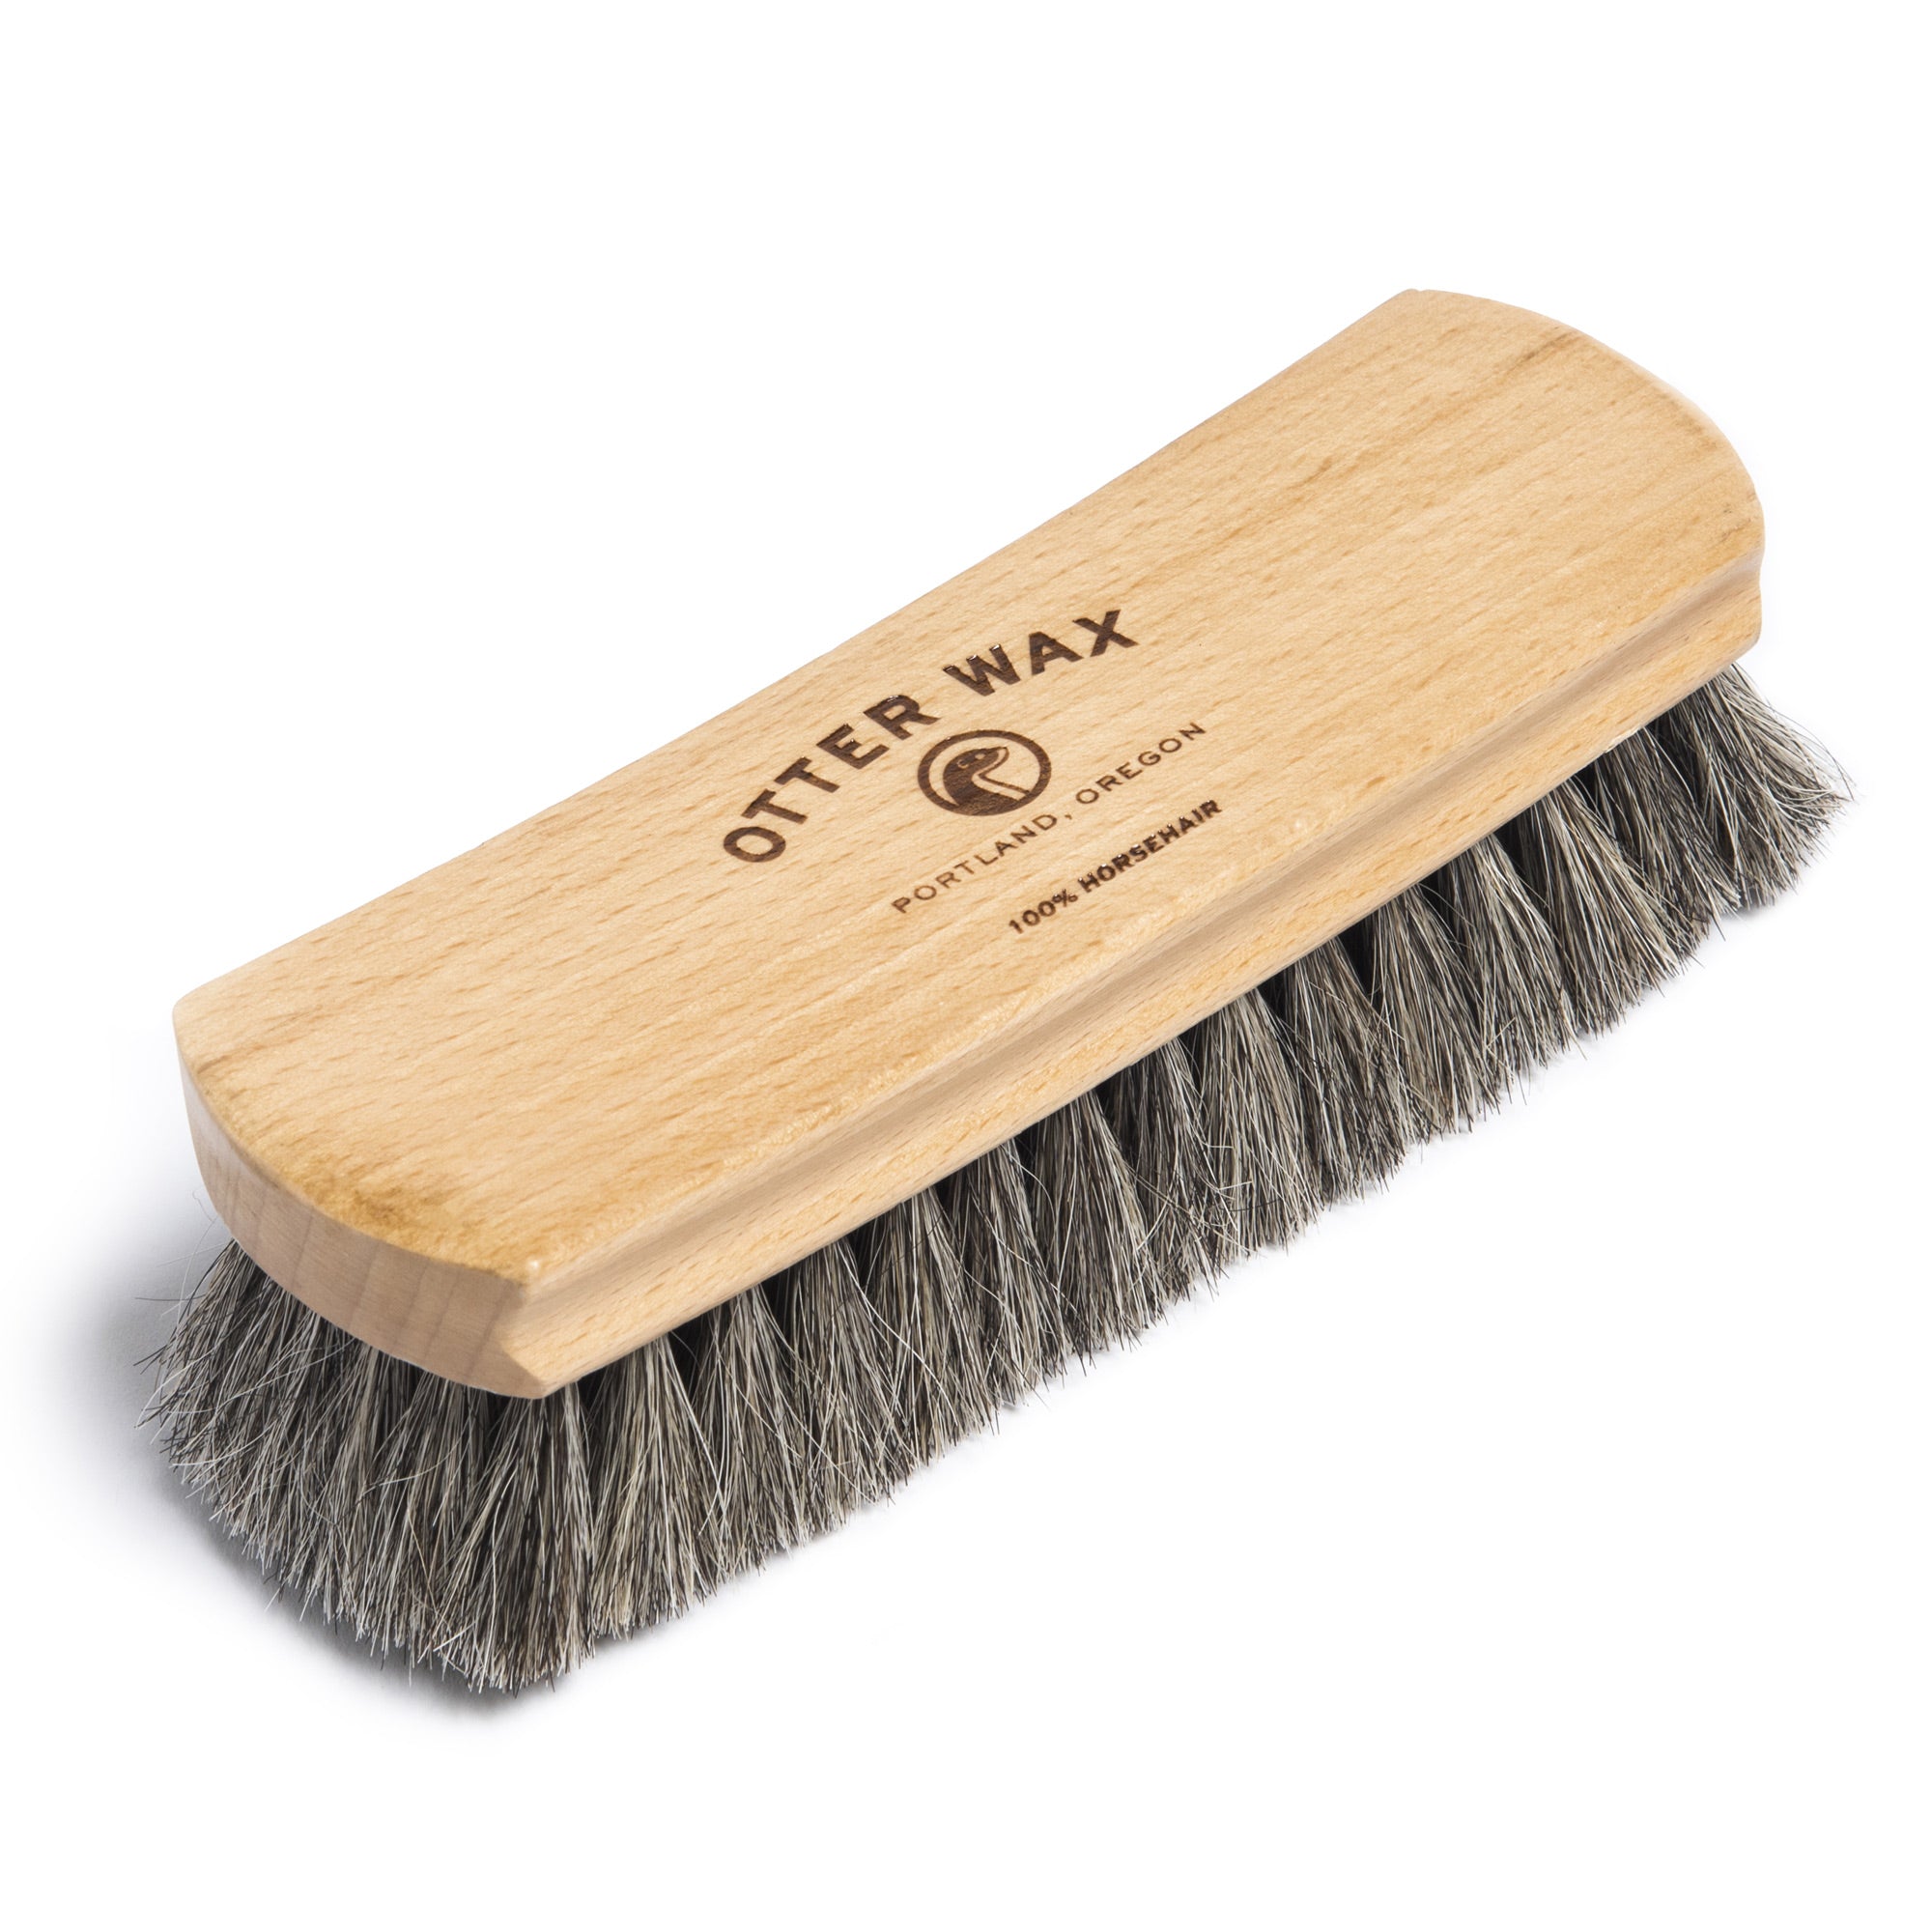 Otter Wax Deluxe Horsehair Hand Brush Soft Bristles For Buffing Leather Shoes Boots And Furniture